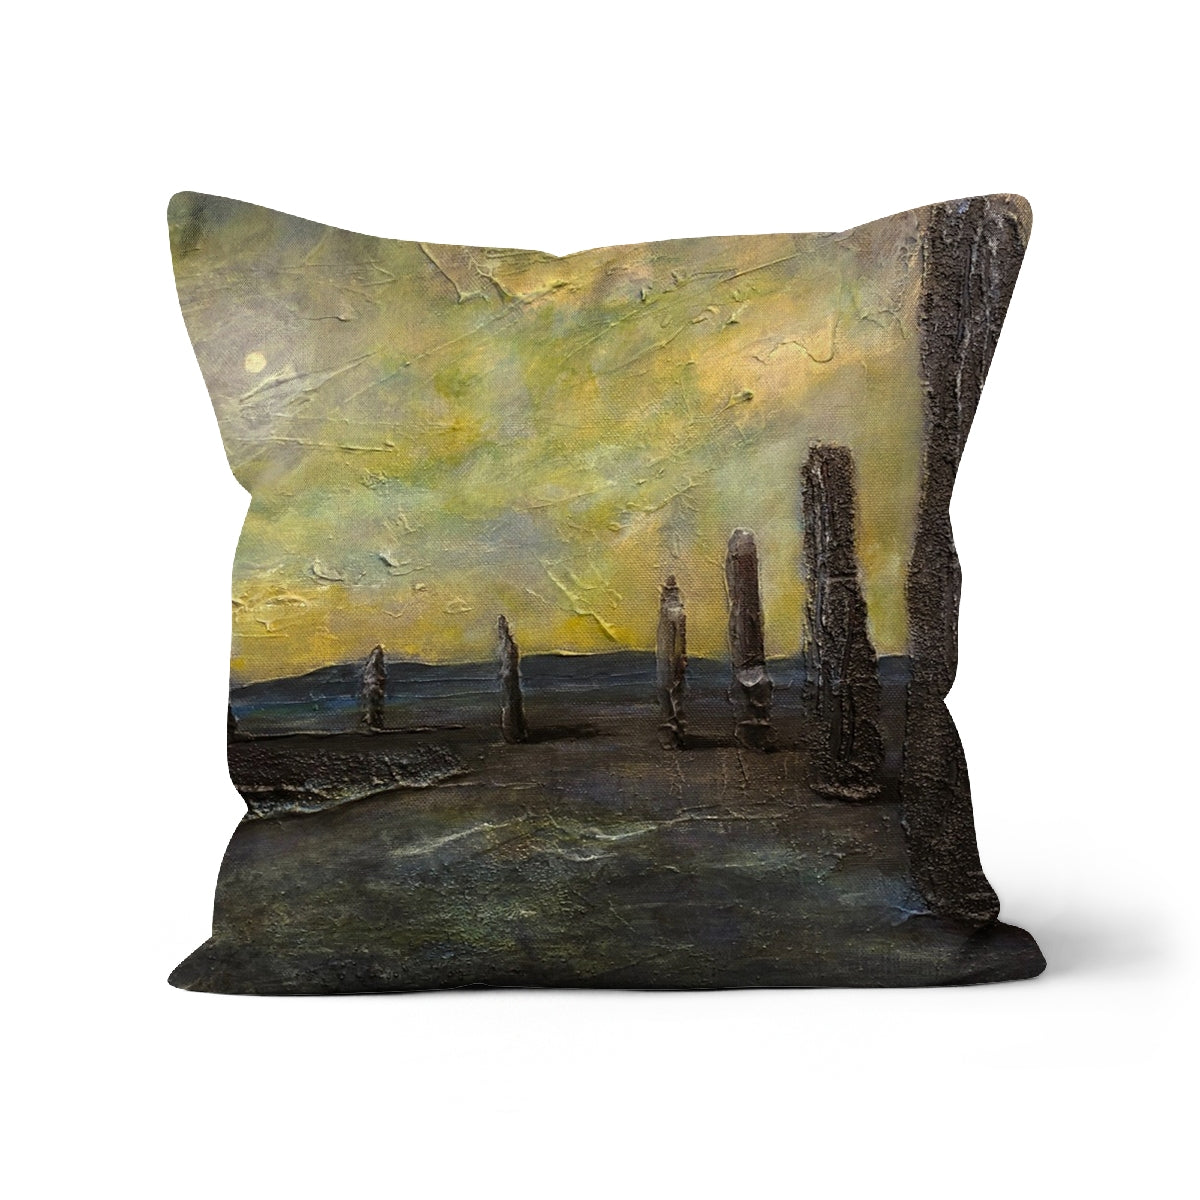 An Ethereal Ring Of Brodgar Art Gifts Cushion-Cushions-Orkney Art Gallery-Faux Suede-24"x24"-Paintings, Prints, Homeware, Art Gifts From Scotland By Scottish Artist Kevin Hunter